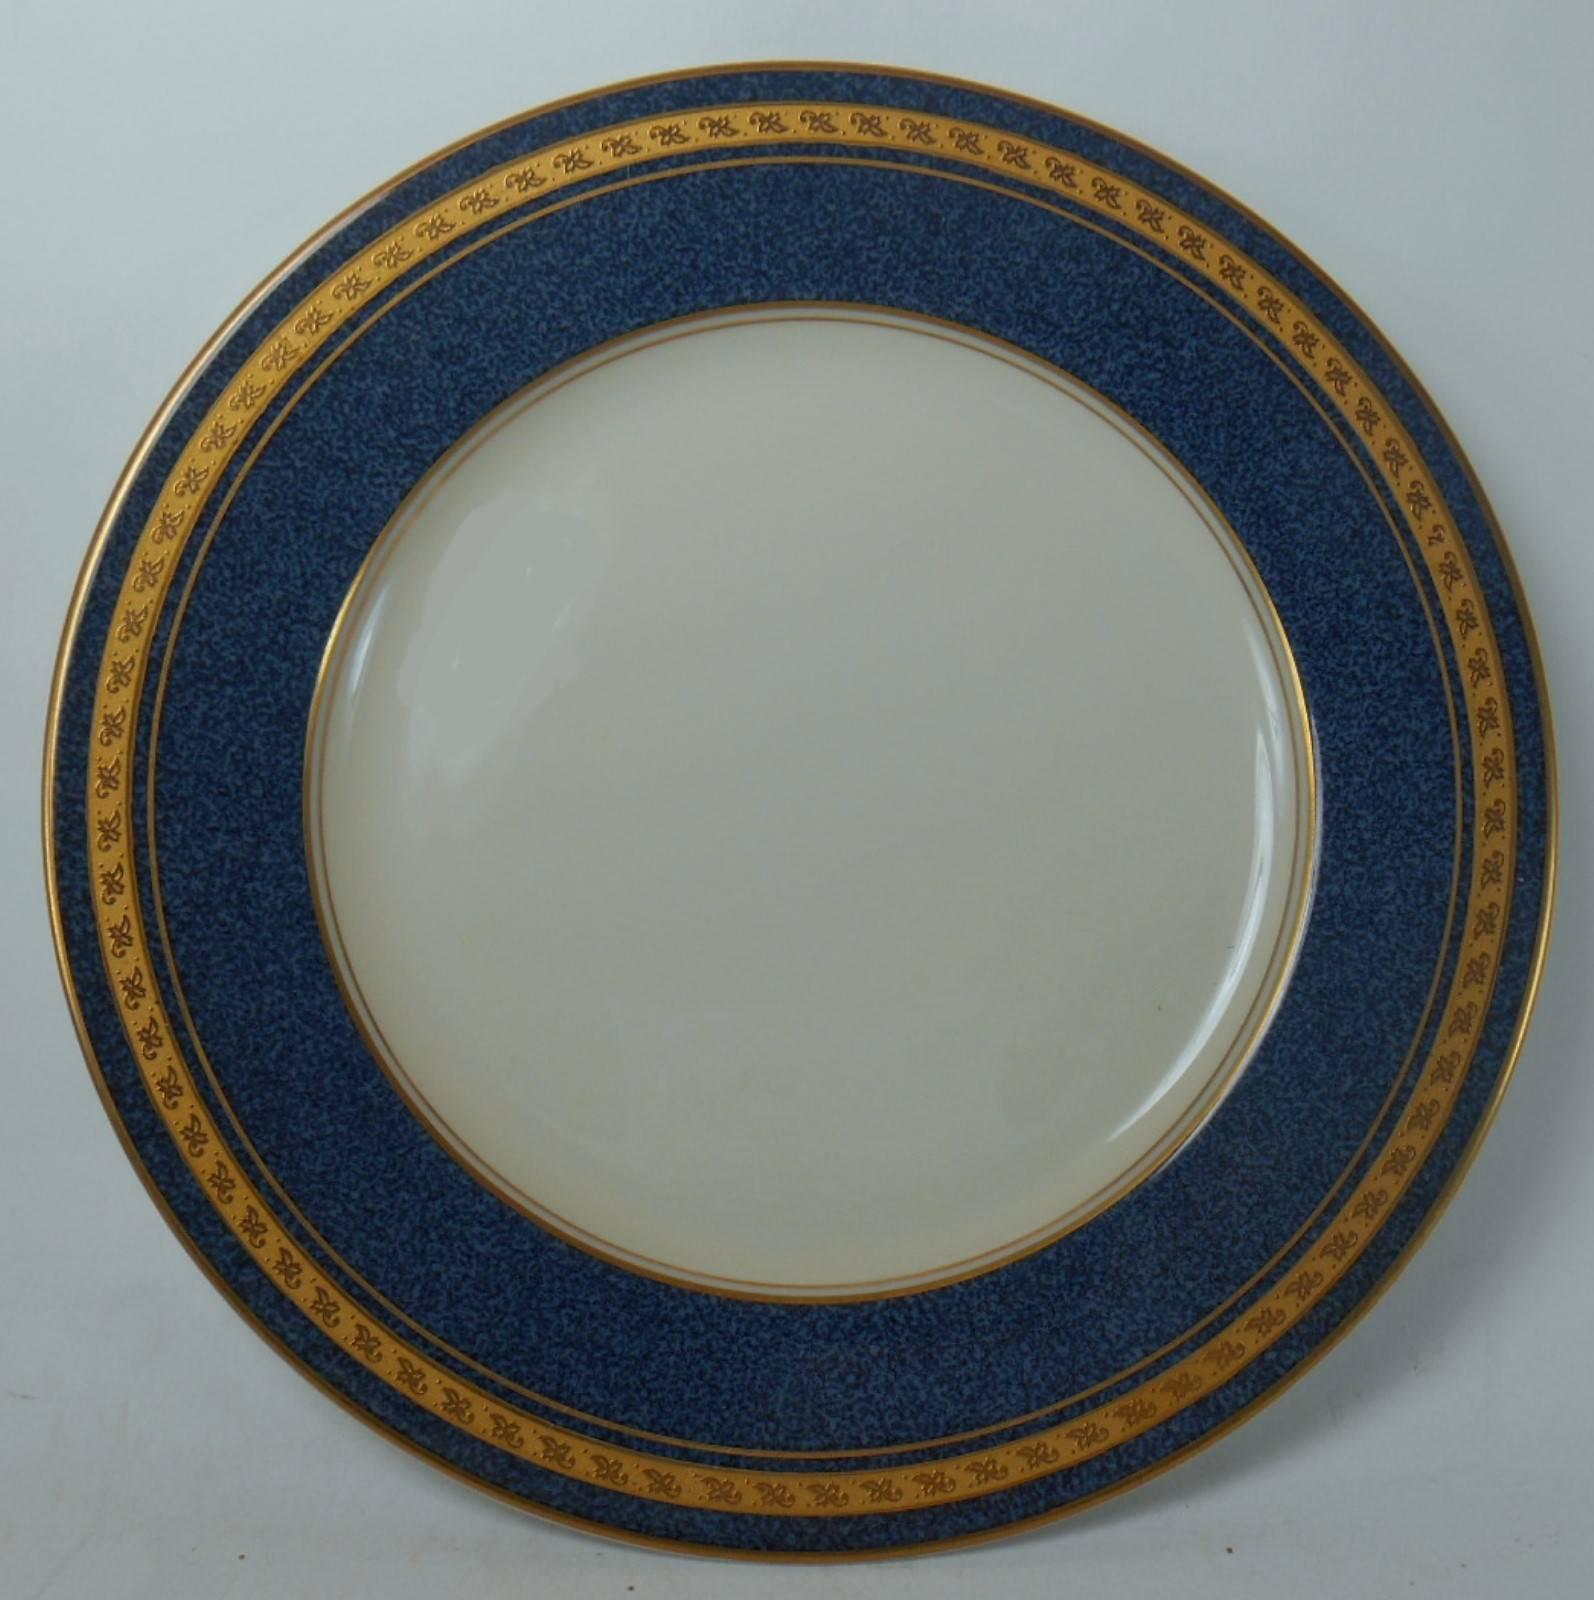 Japanese Mikasa China Imperial Lapis L2826 60-Pieces Set Service for 12